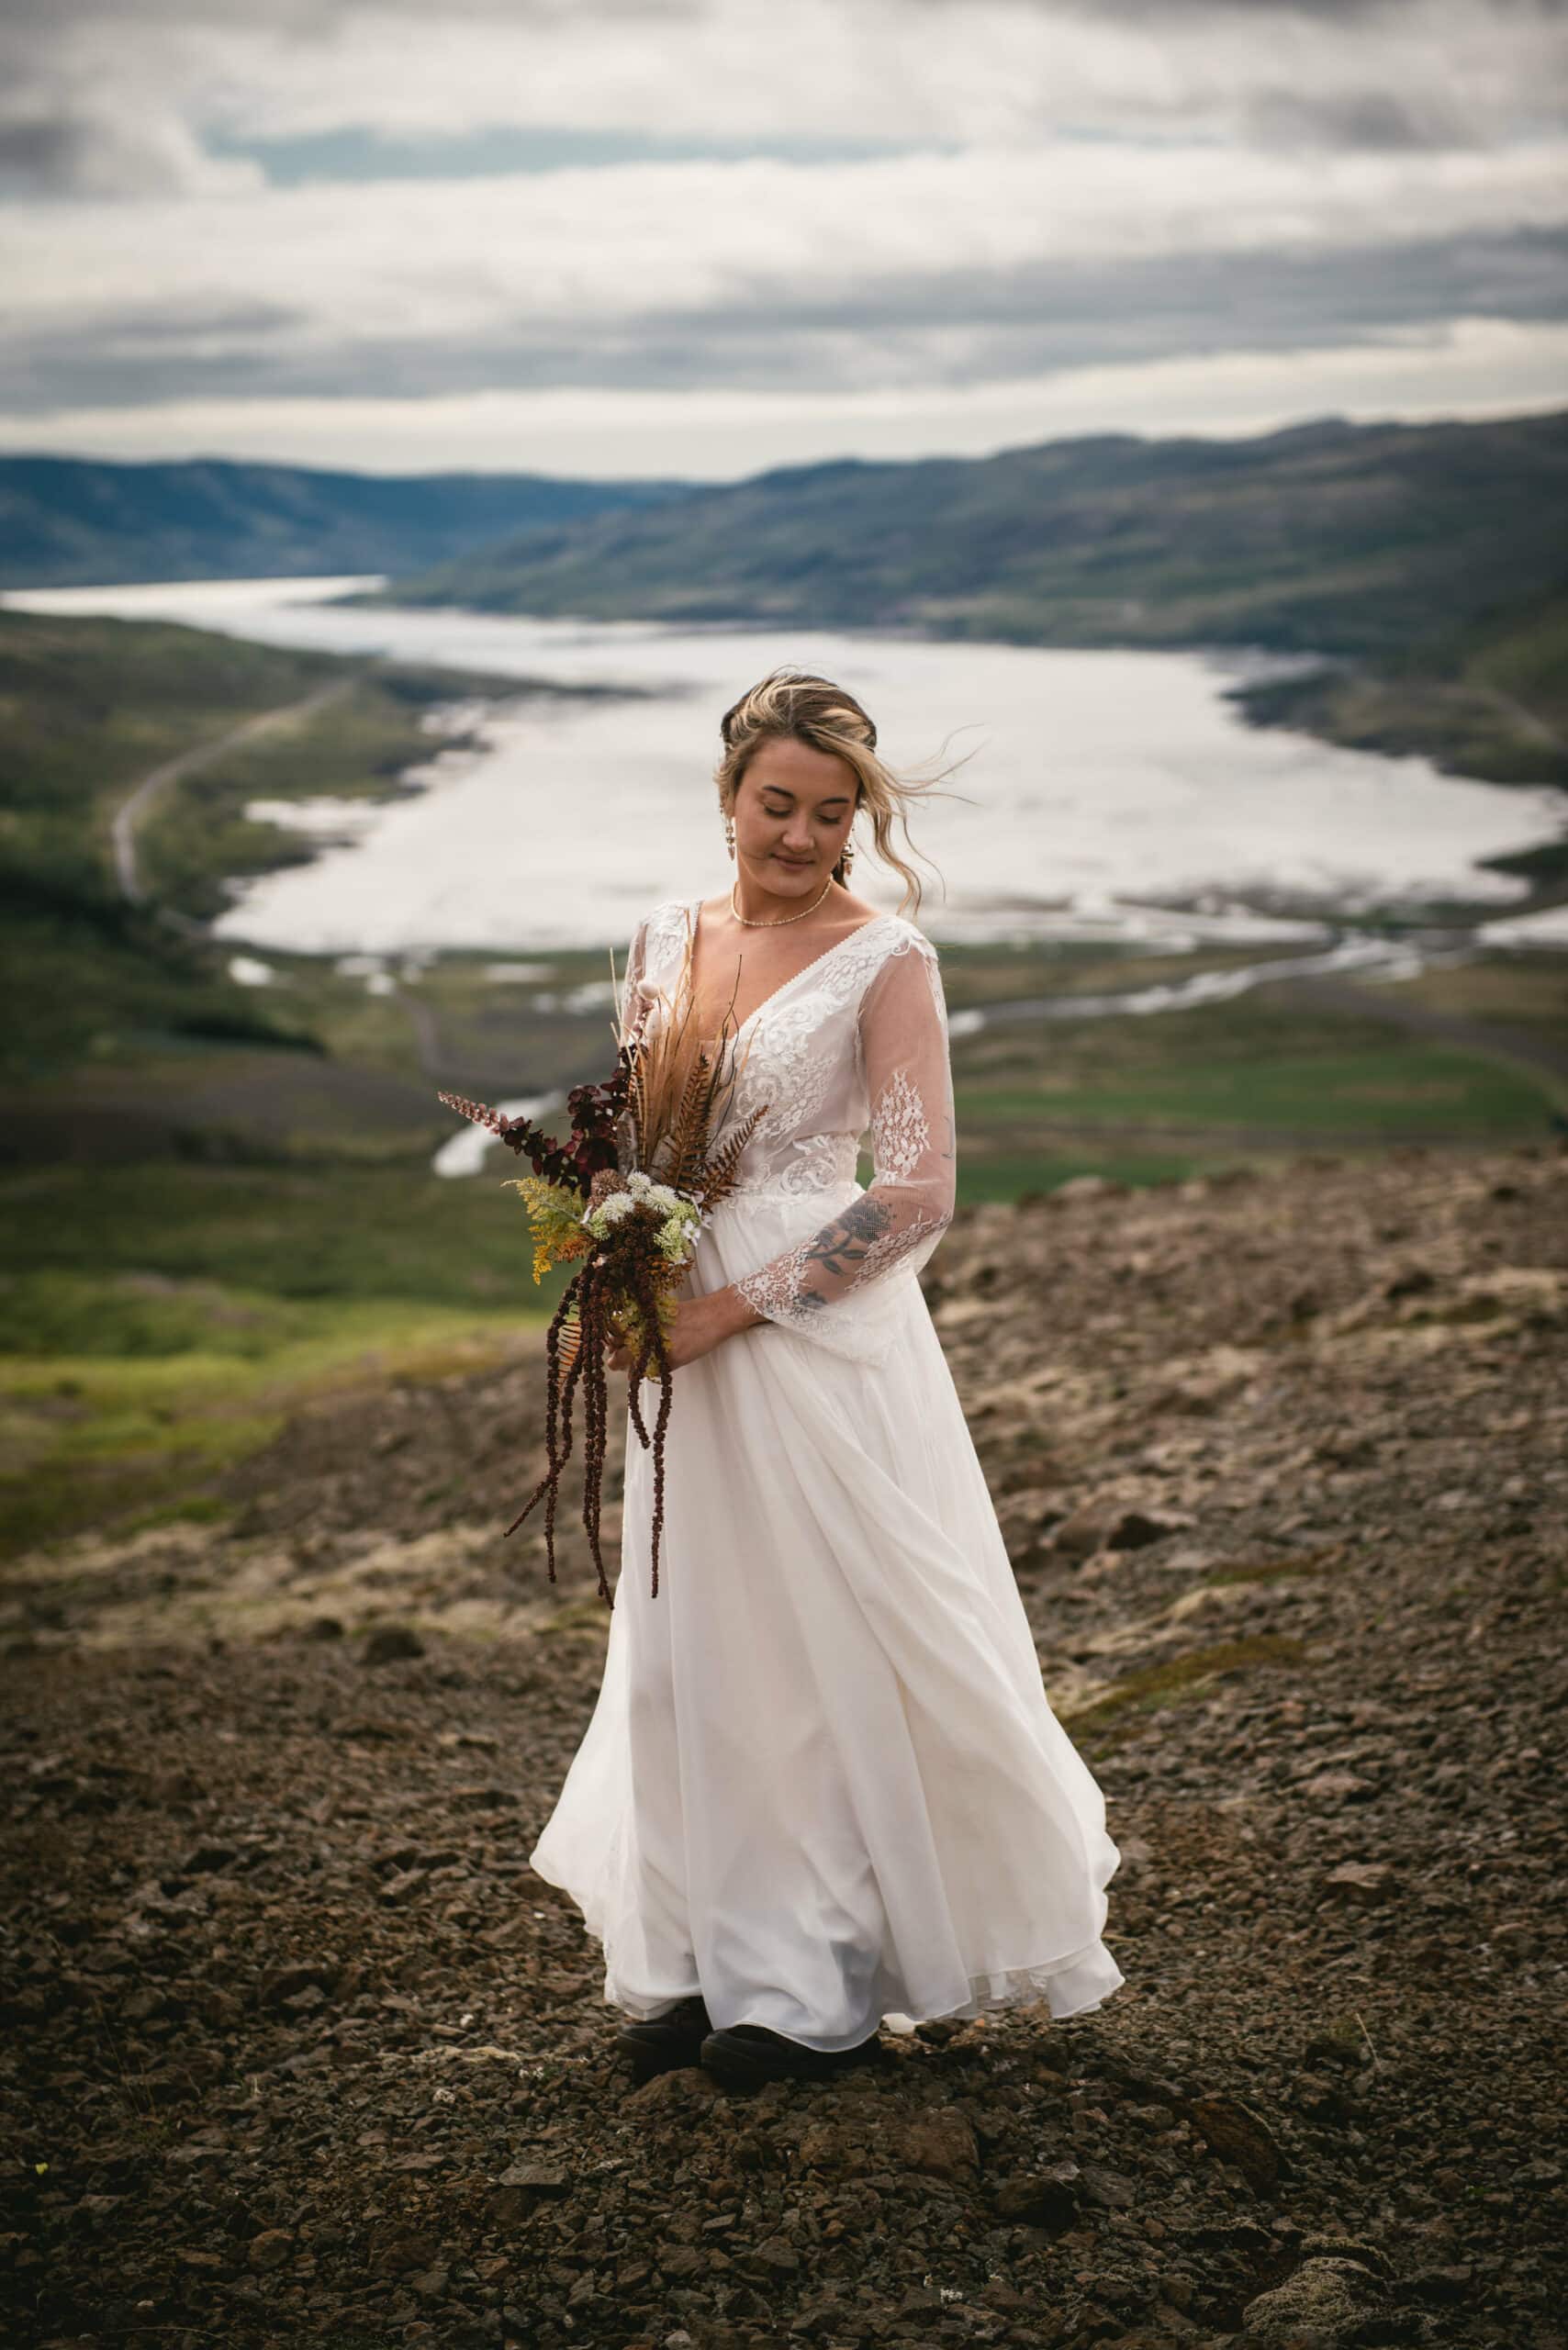 A close-up of the bride's vibrant bouquet against a backdrop of the Westfjords' dramatic landscapes.